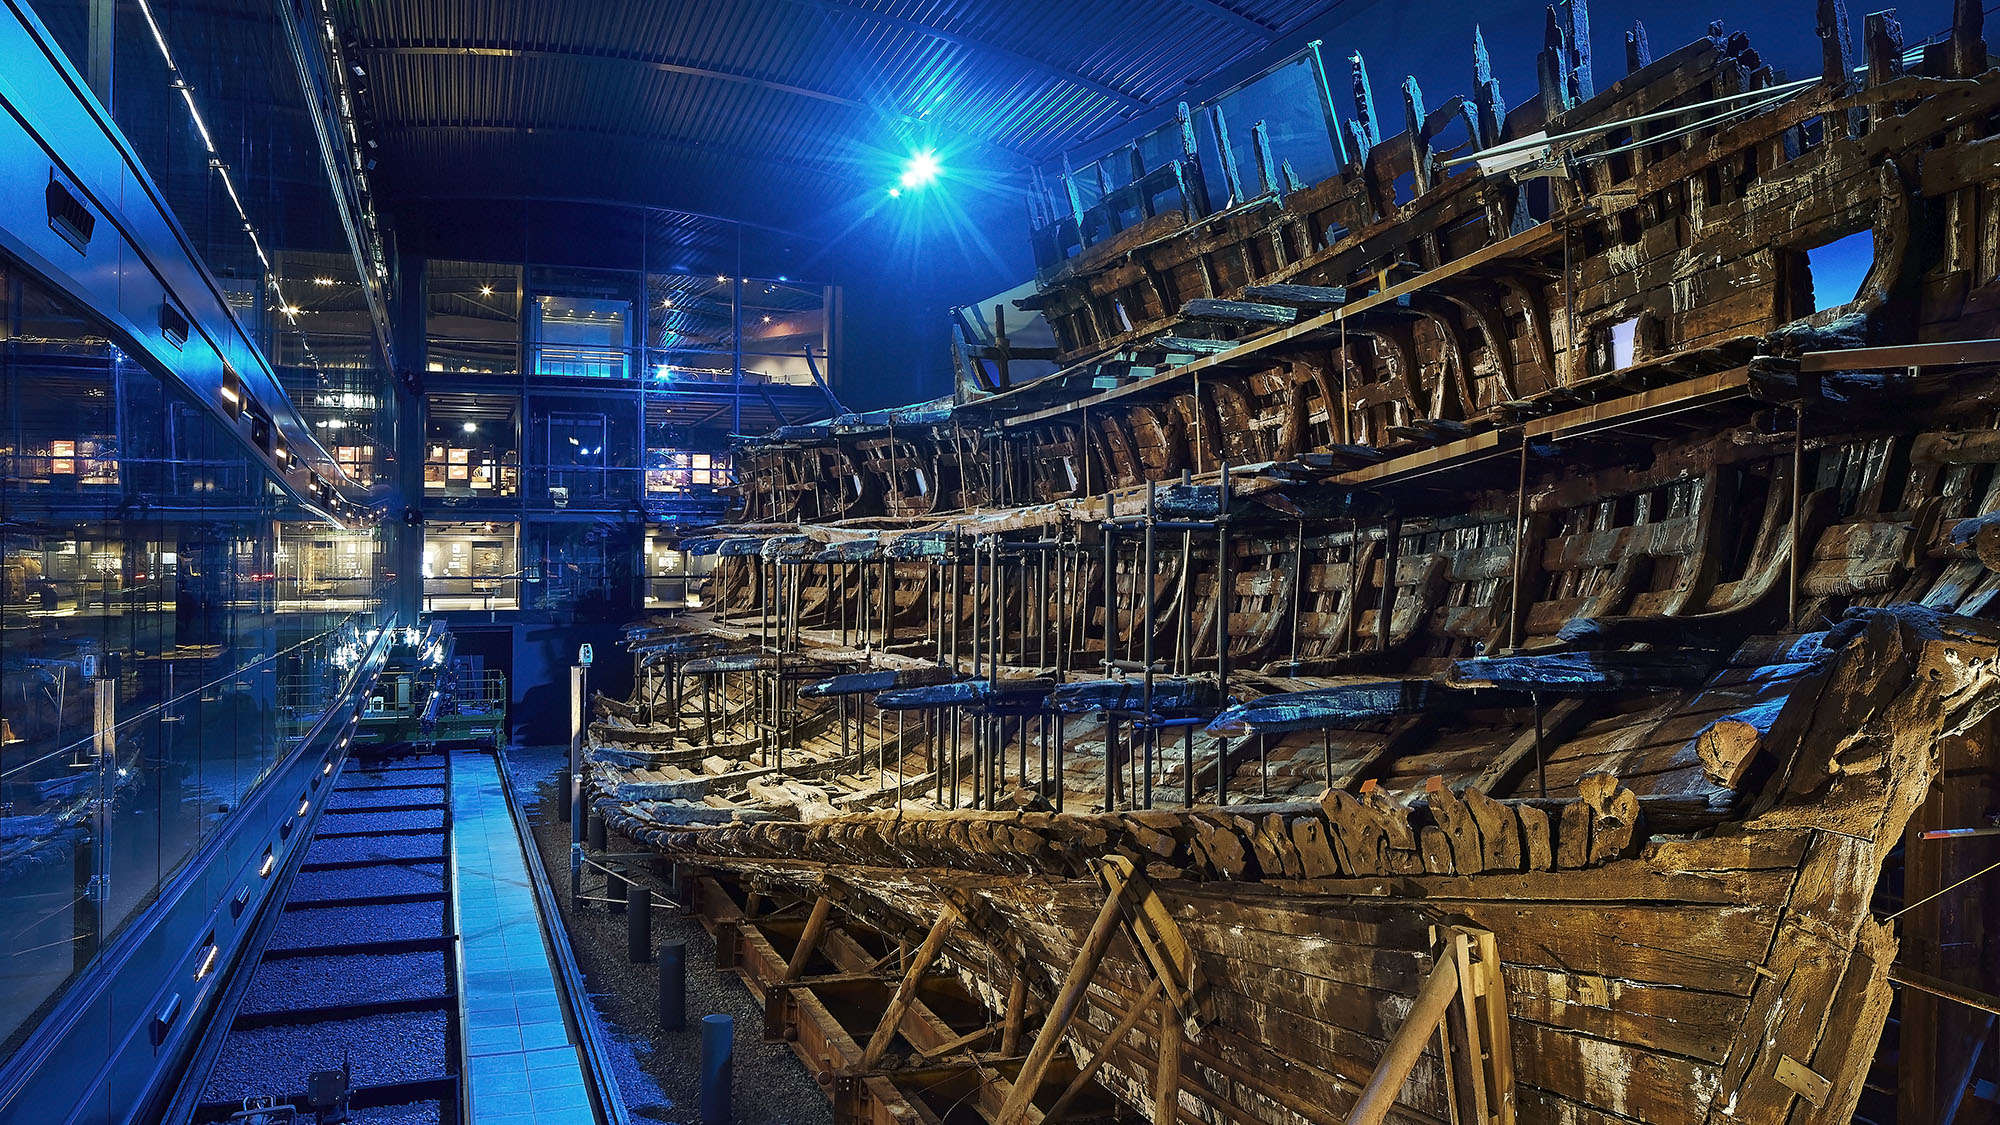 The remains of the Mary Rose